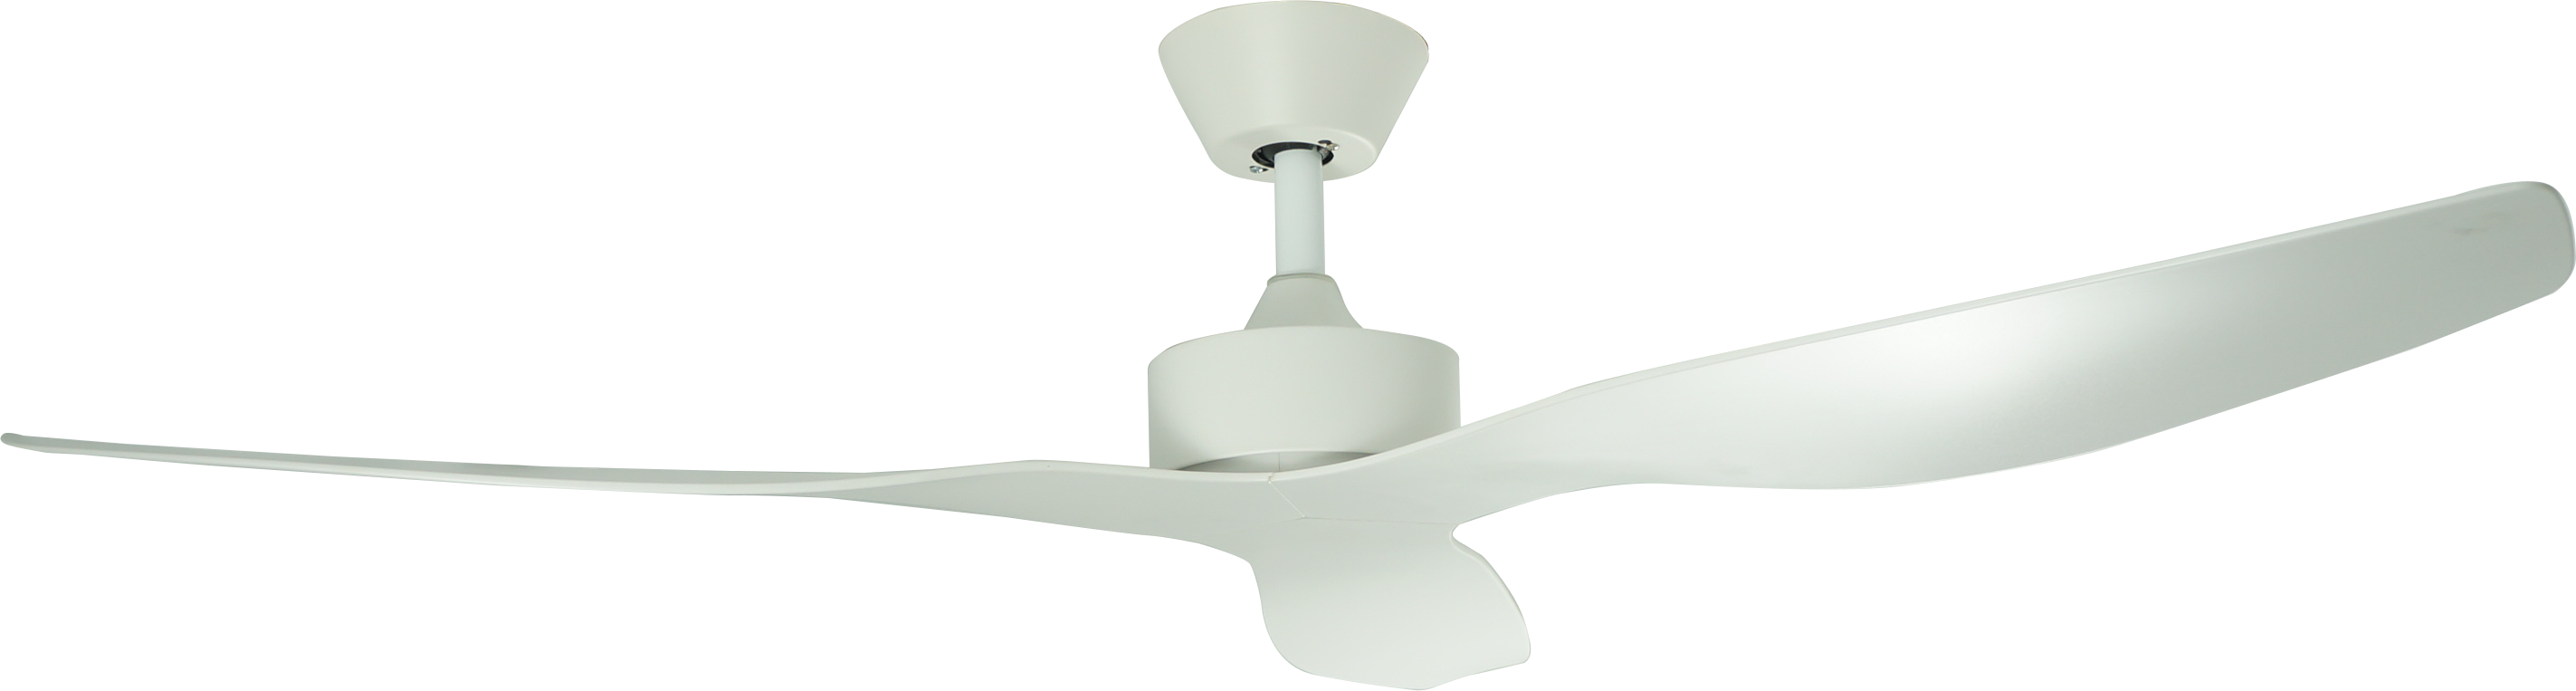 Airbena New Product Retractable 52 Inch Ceiling Fan without Light